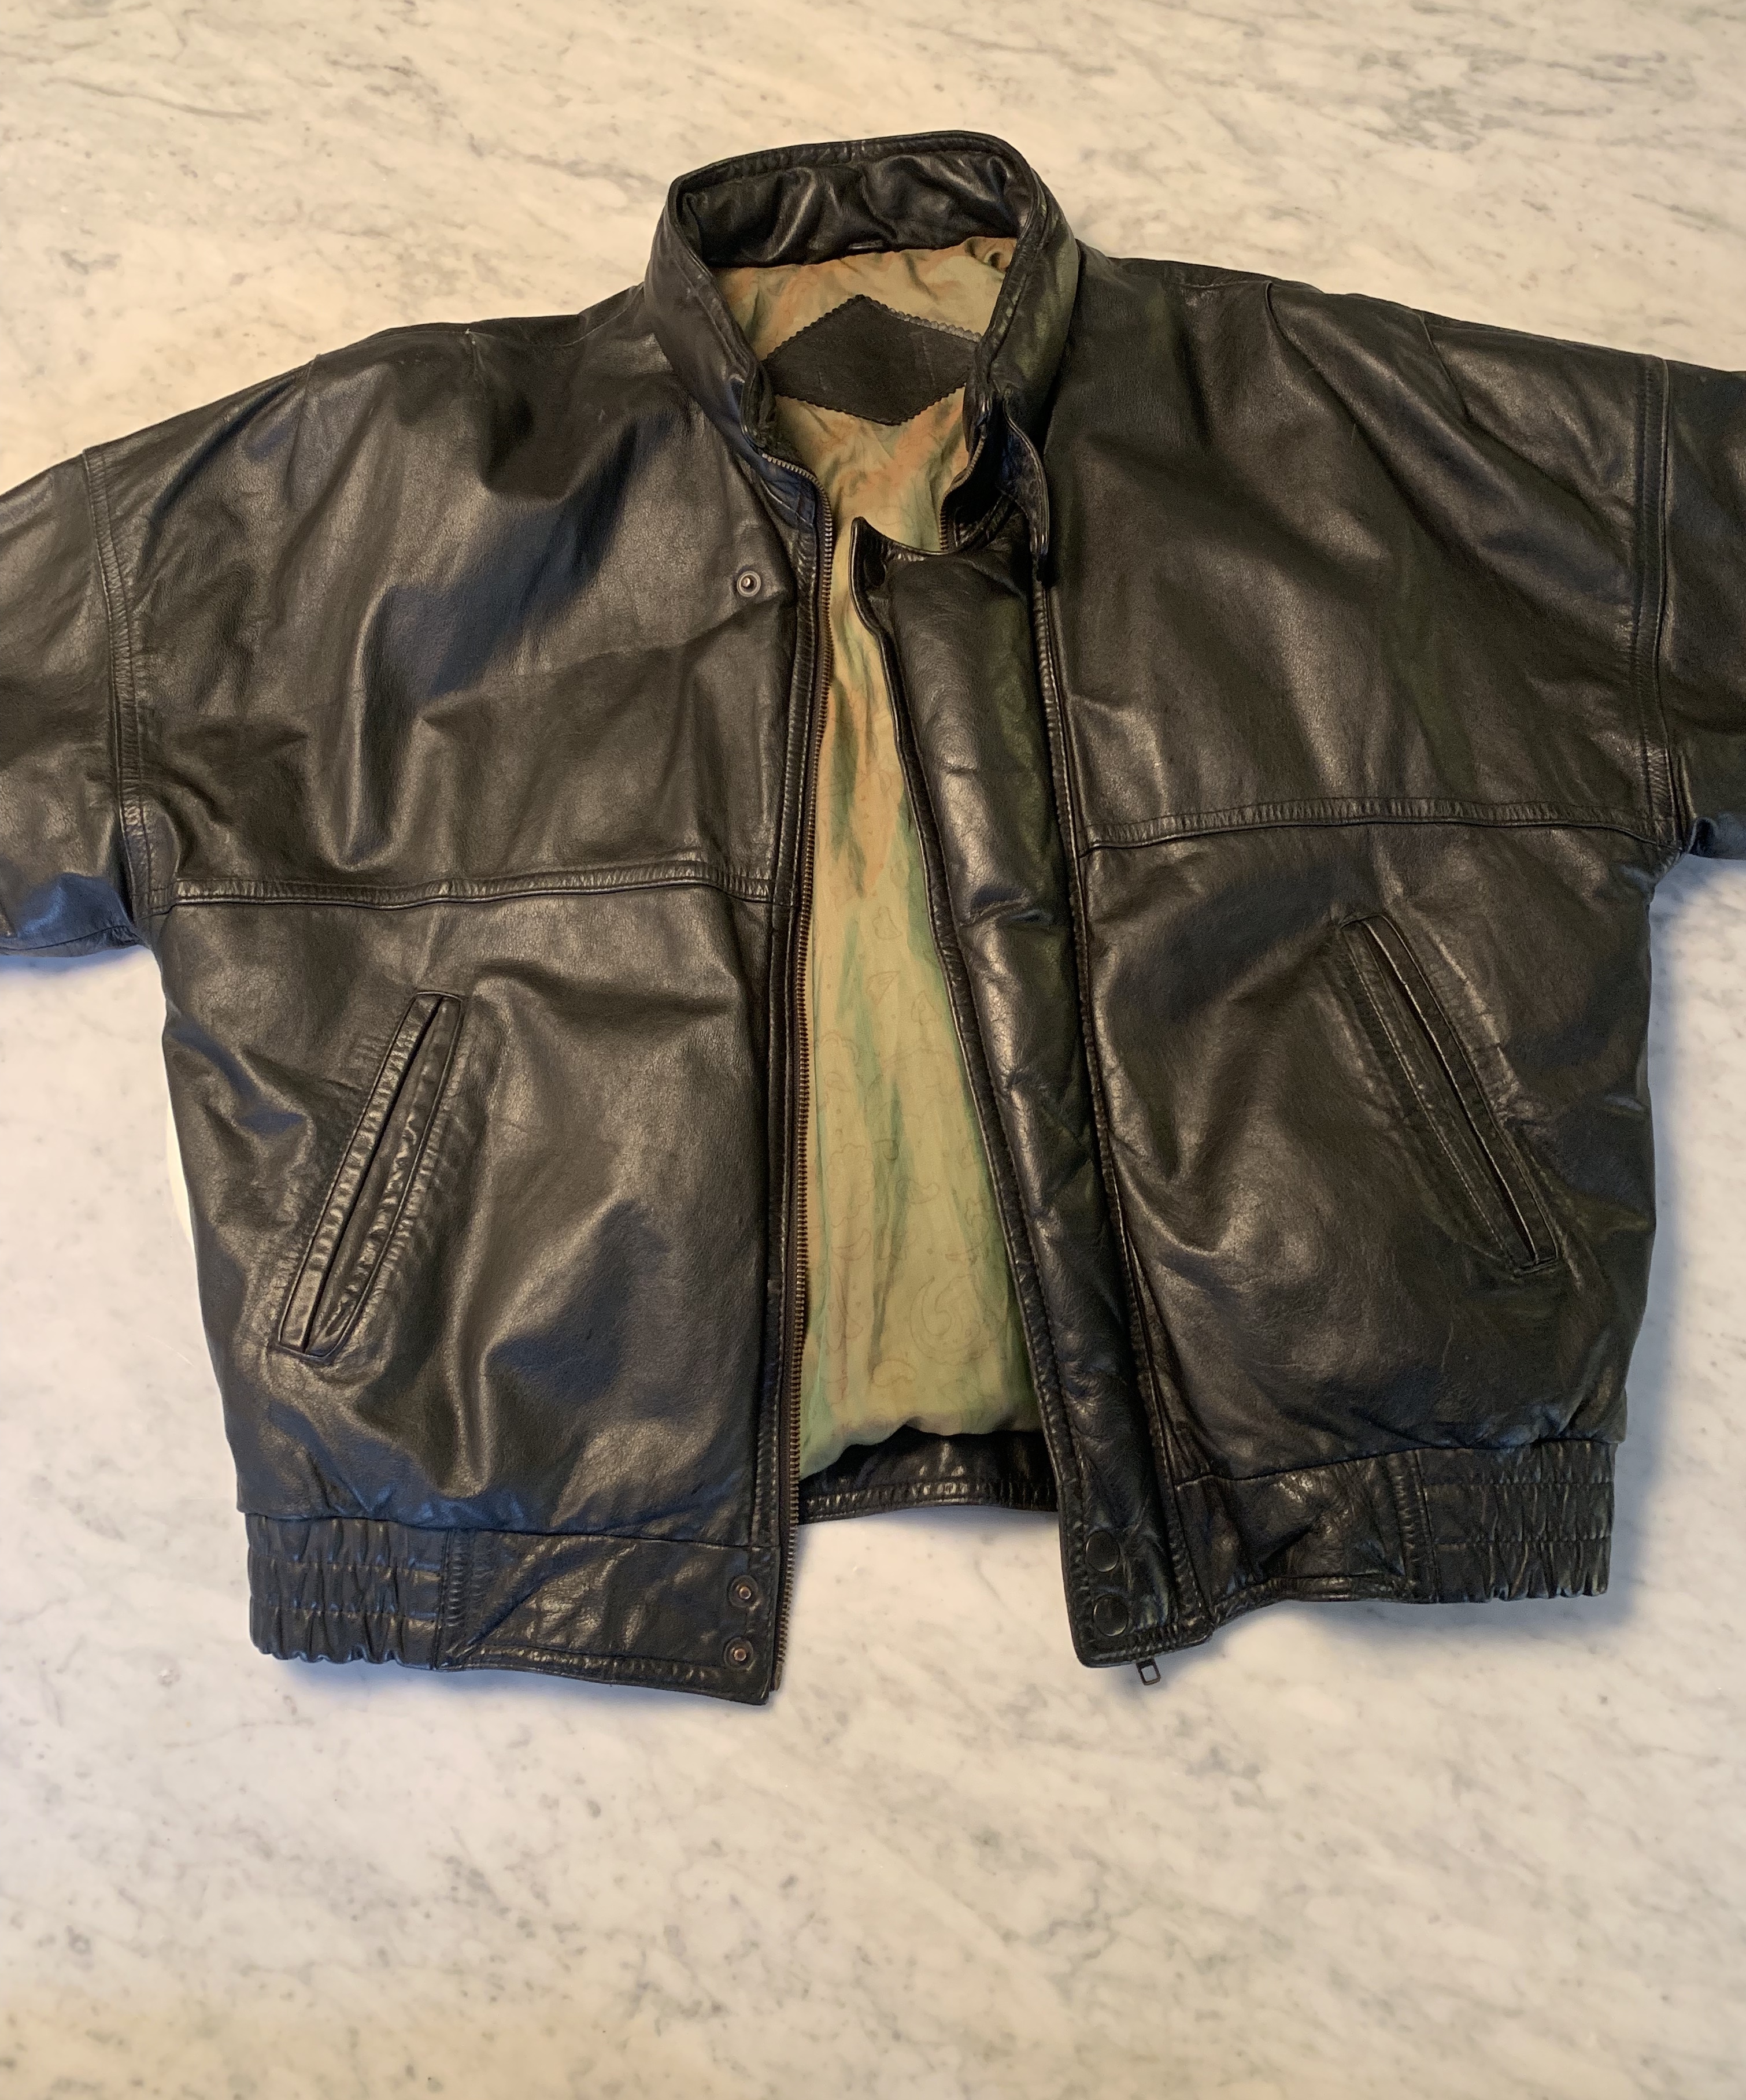 Anyone know anything about this vintage japanese leather jacket